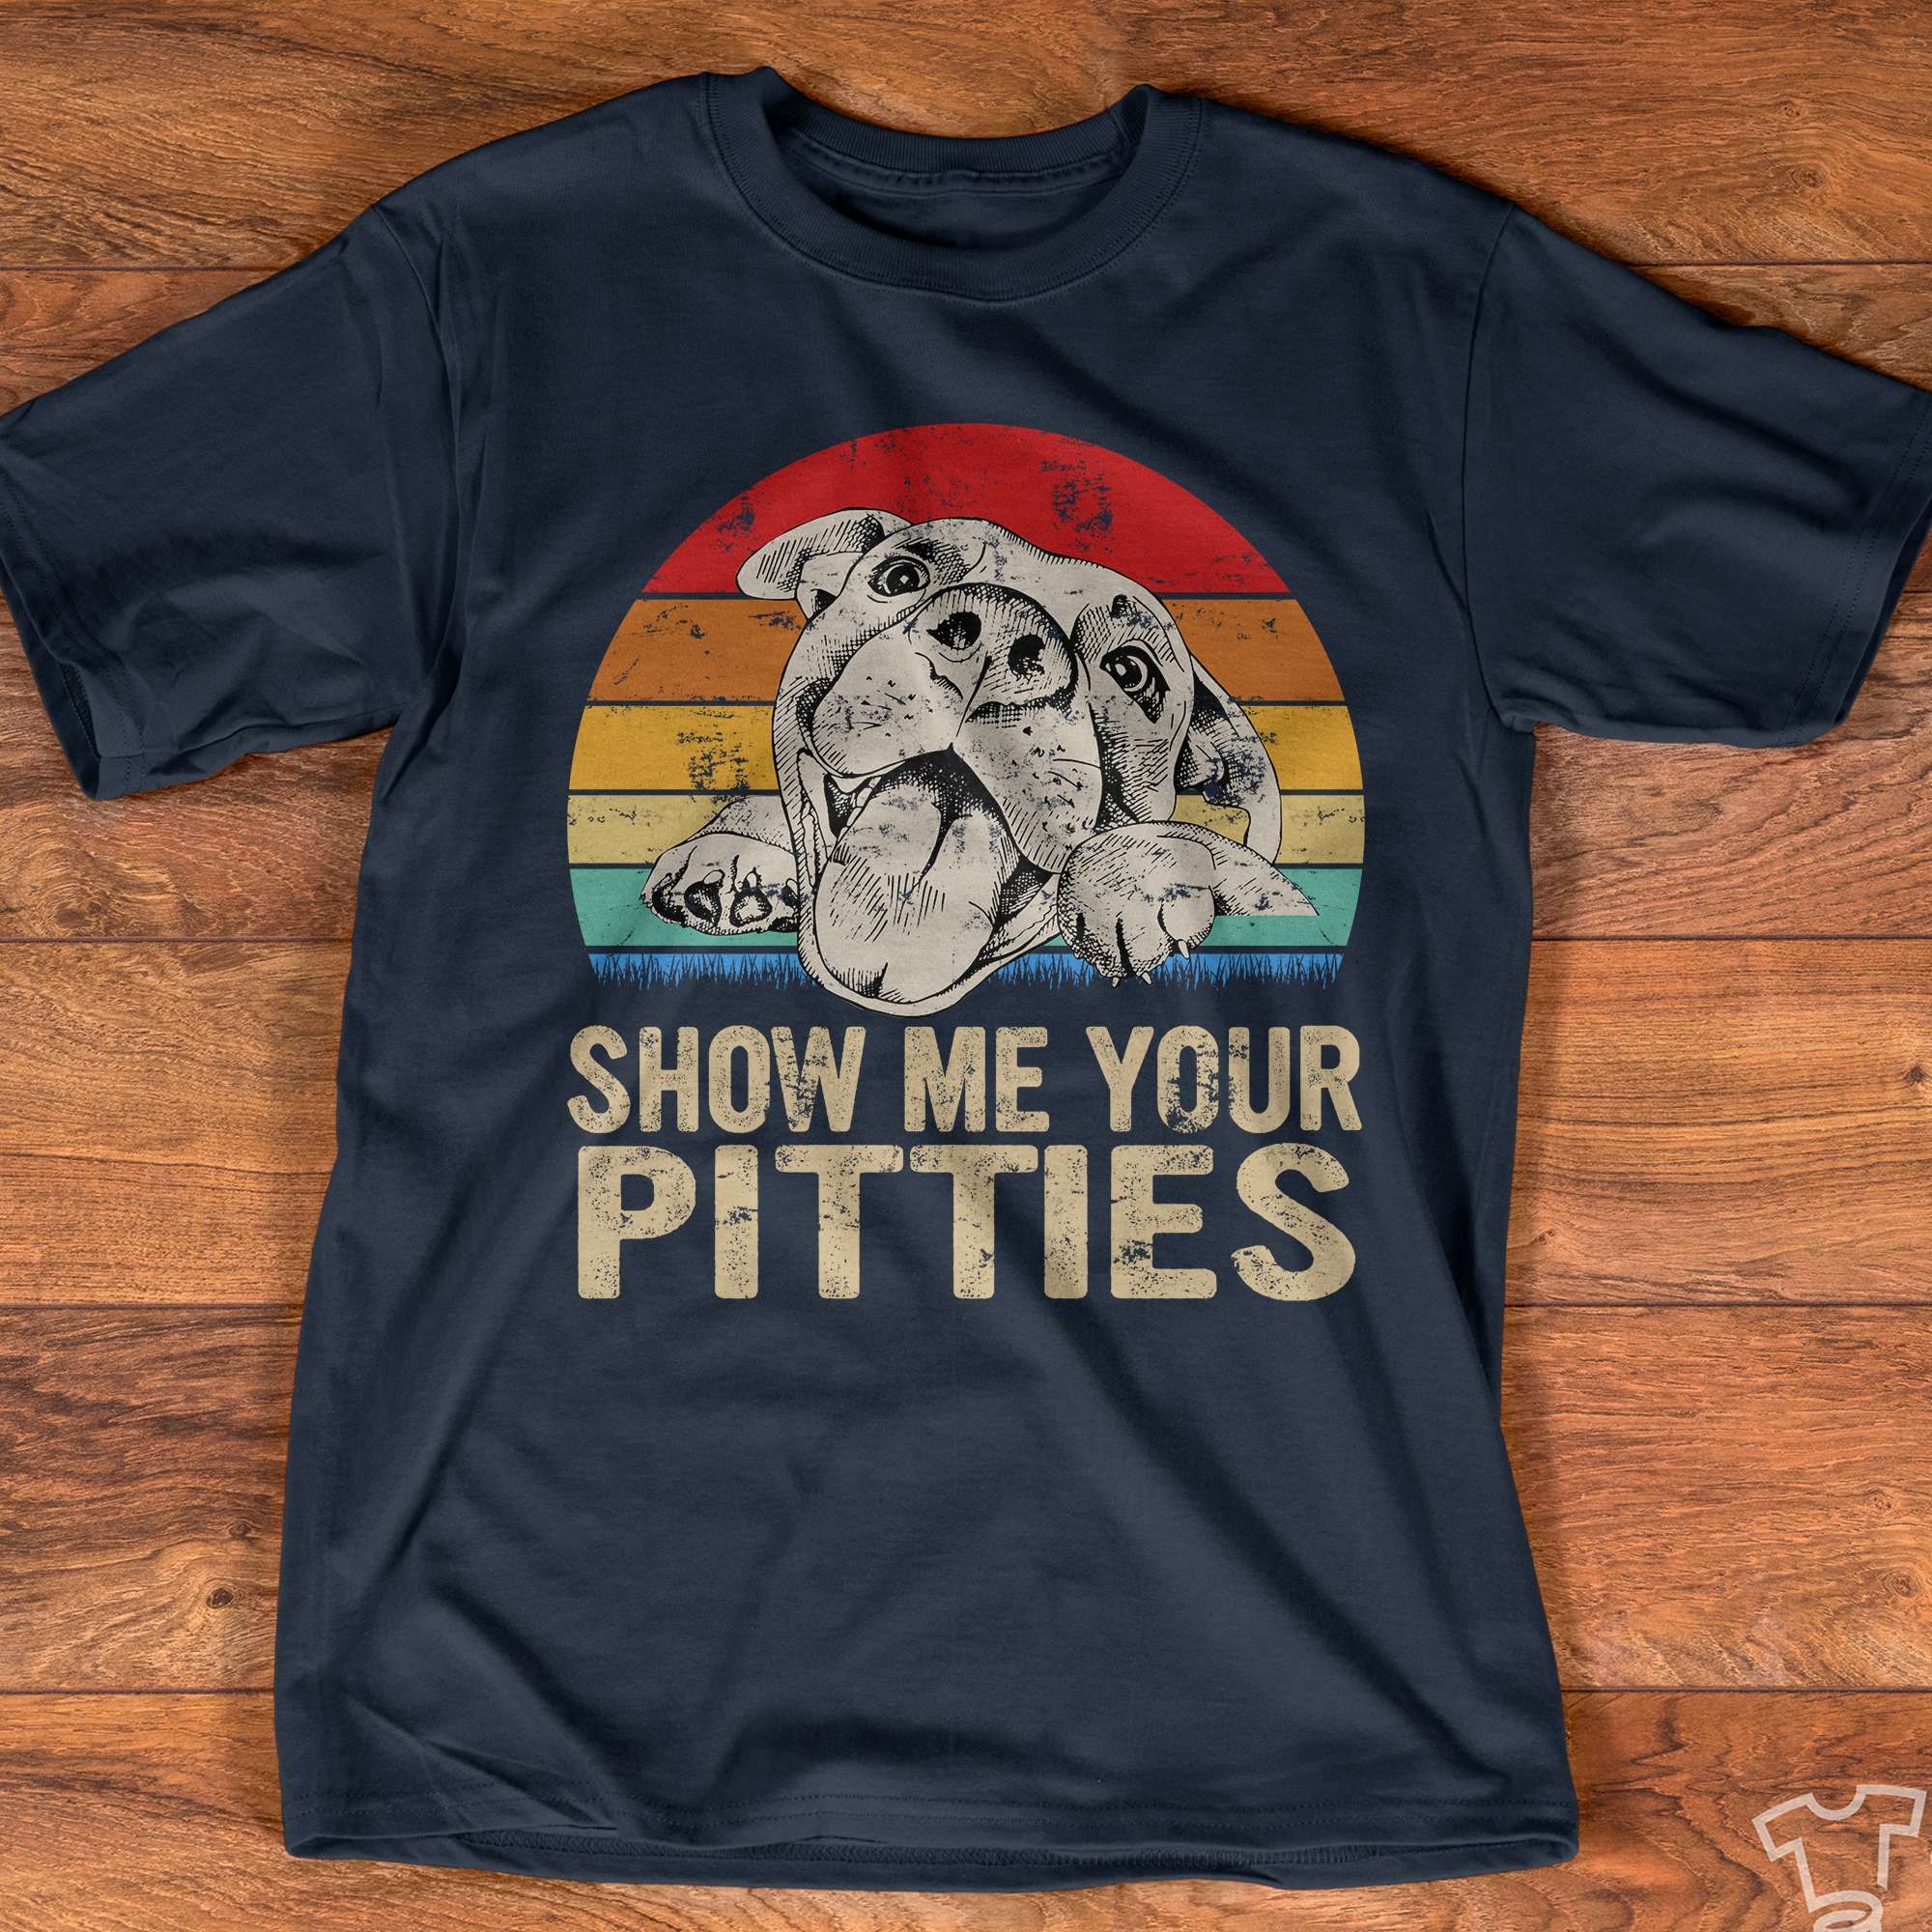 Pitbull Graphic T-shirt - Show me your pitties